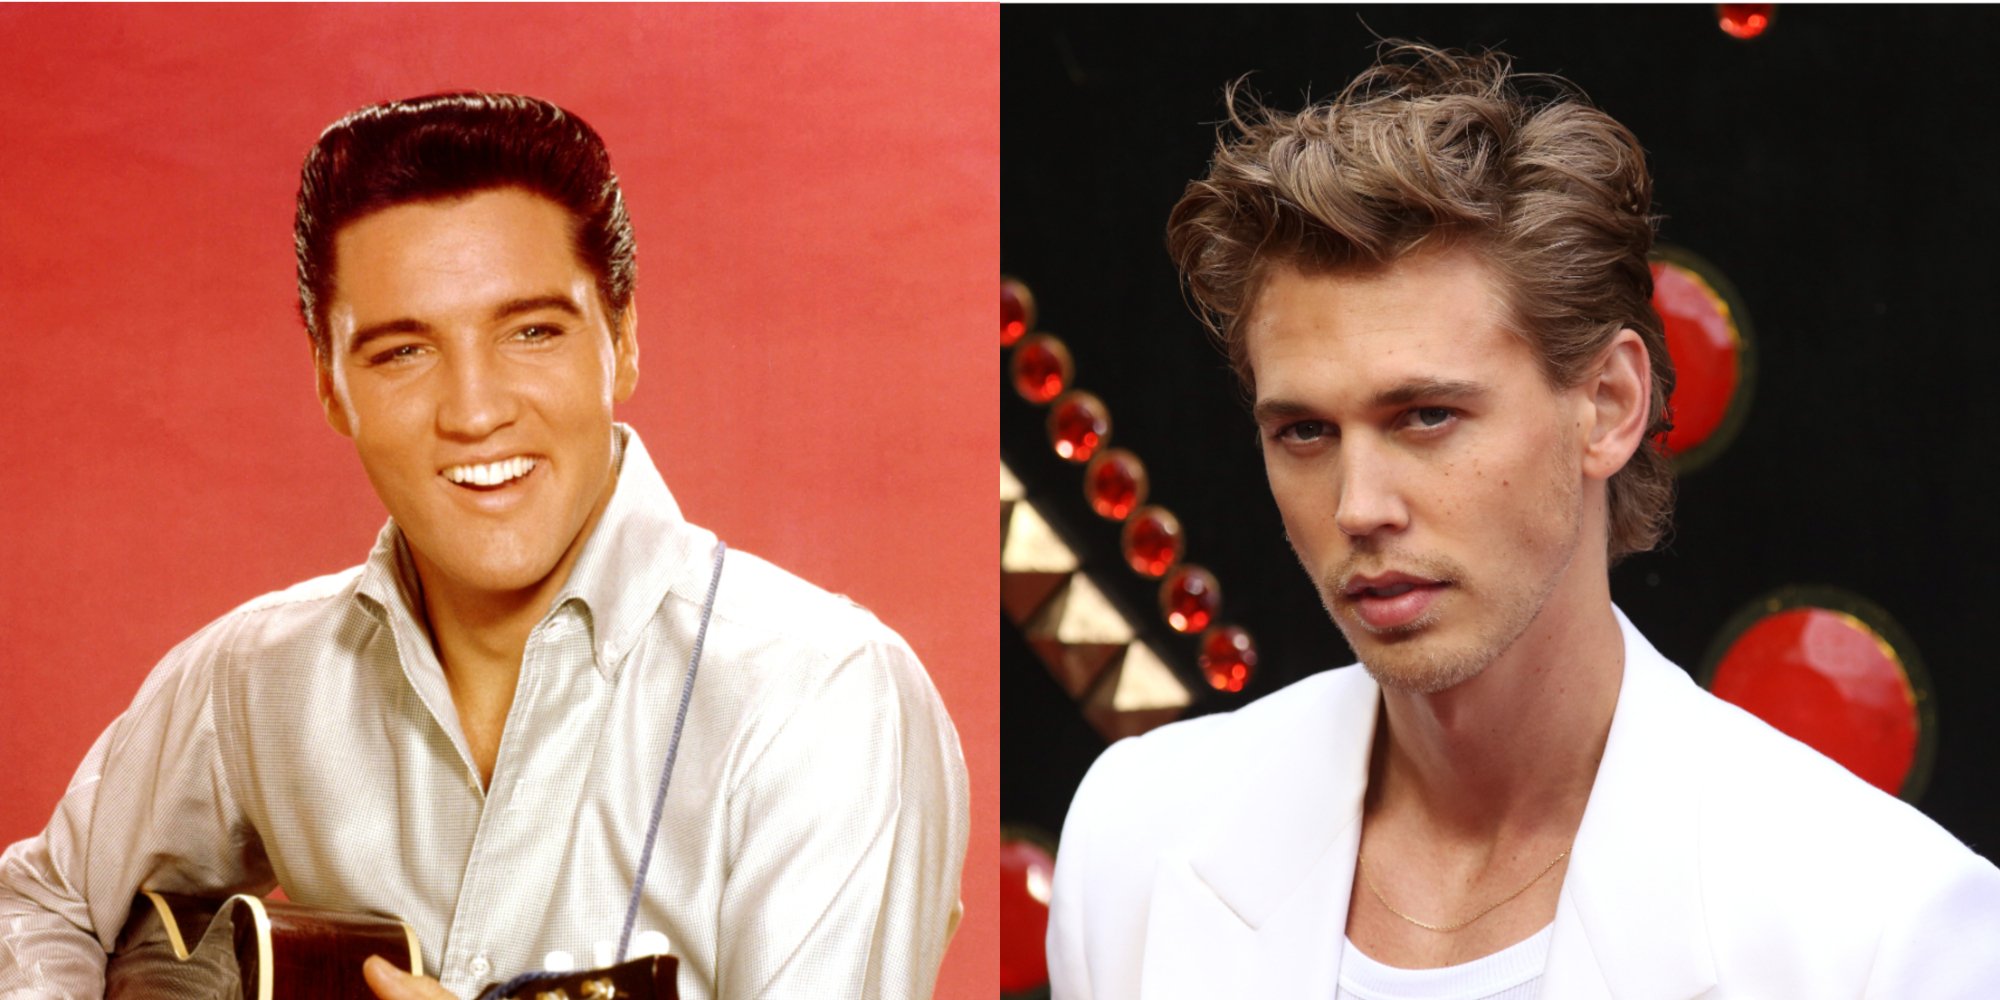 Elvis Presley and Austin Butler who stars in 'Elvis' in side by side photographs.